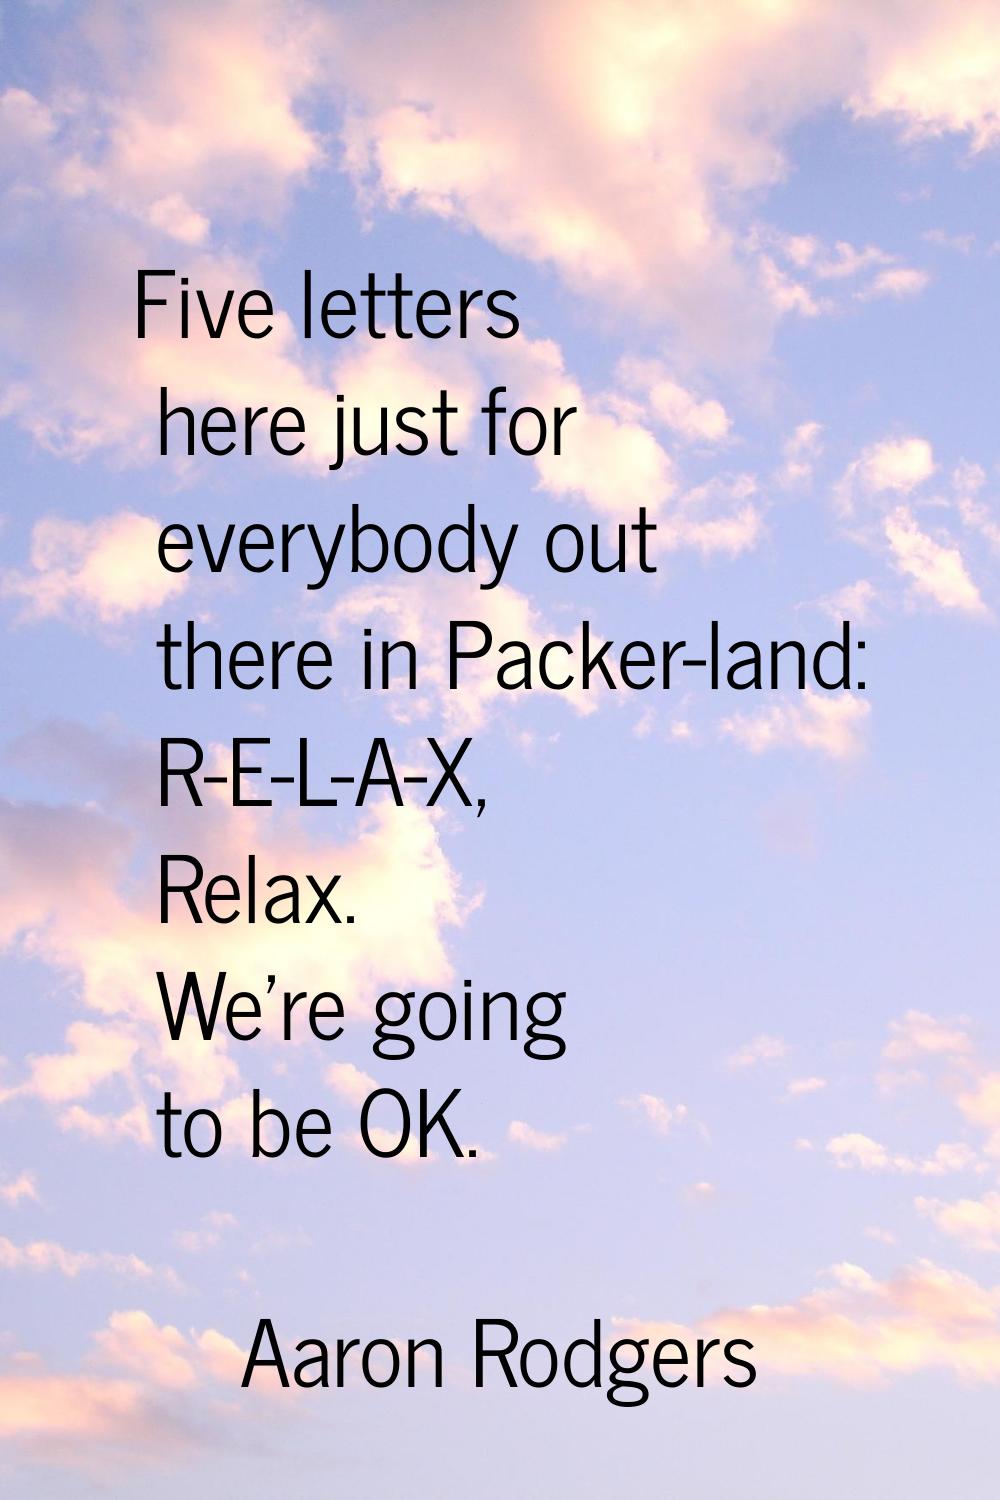 Five letters here just for everybody out there in Packer-land: R-E-L-A-X, Relax. We're going to be 